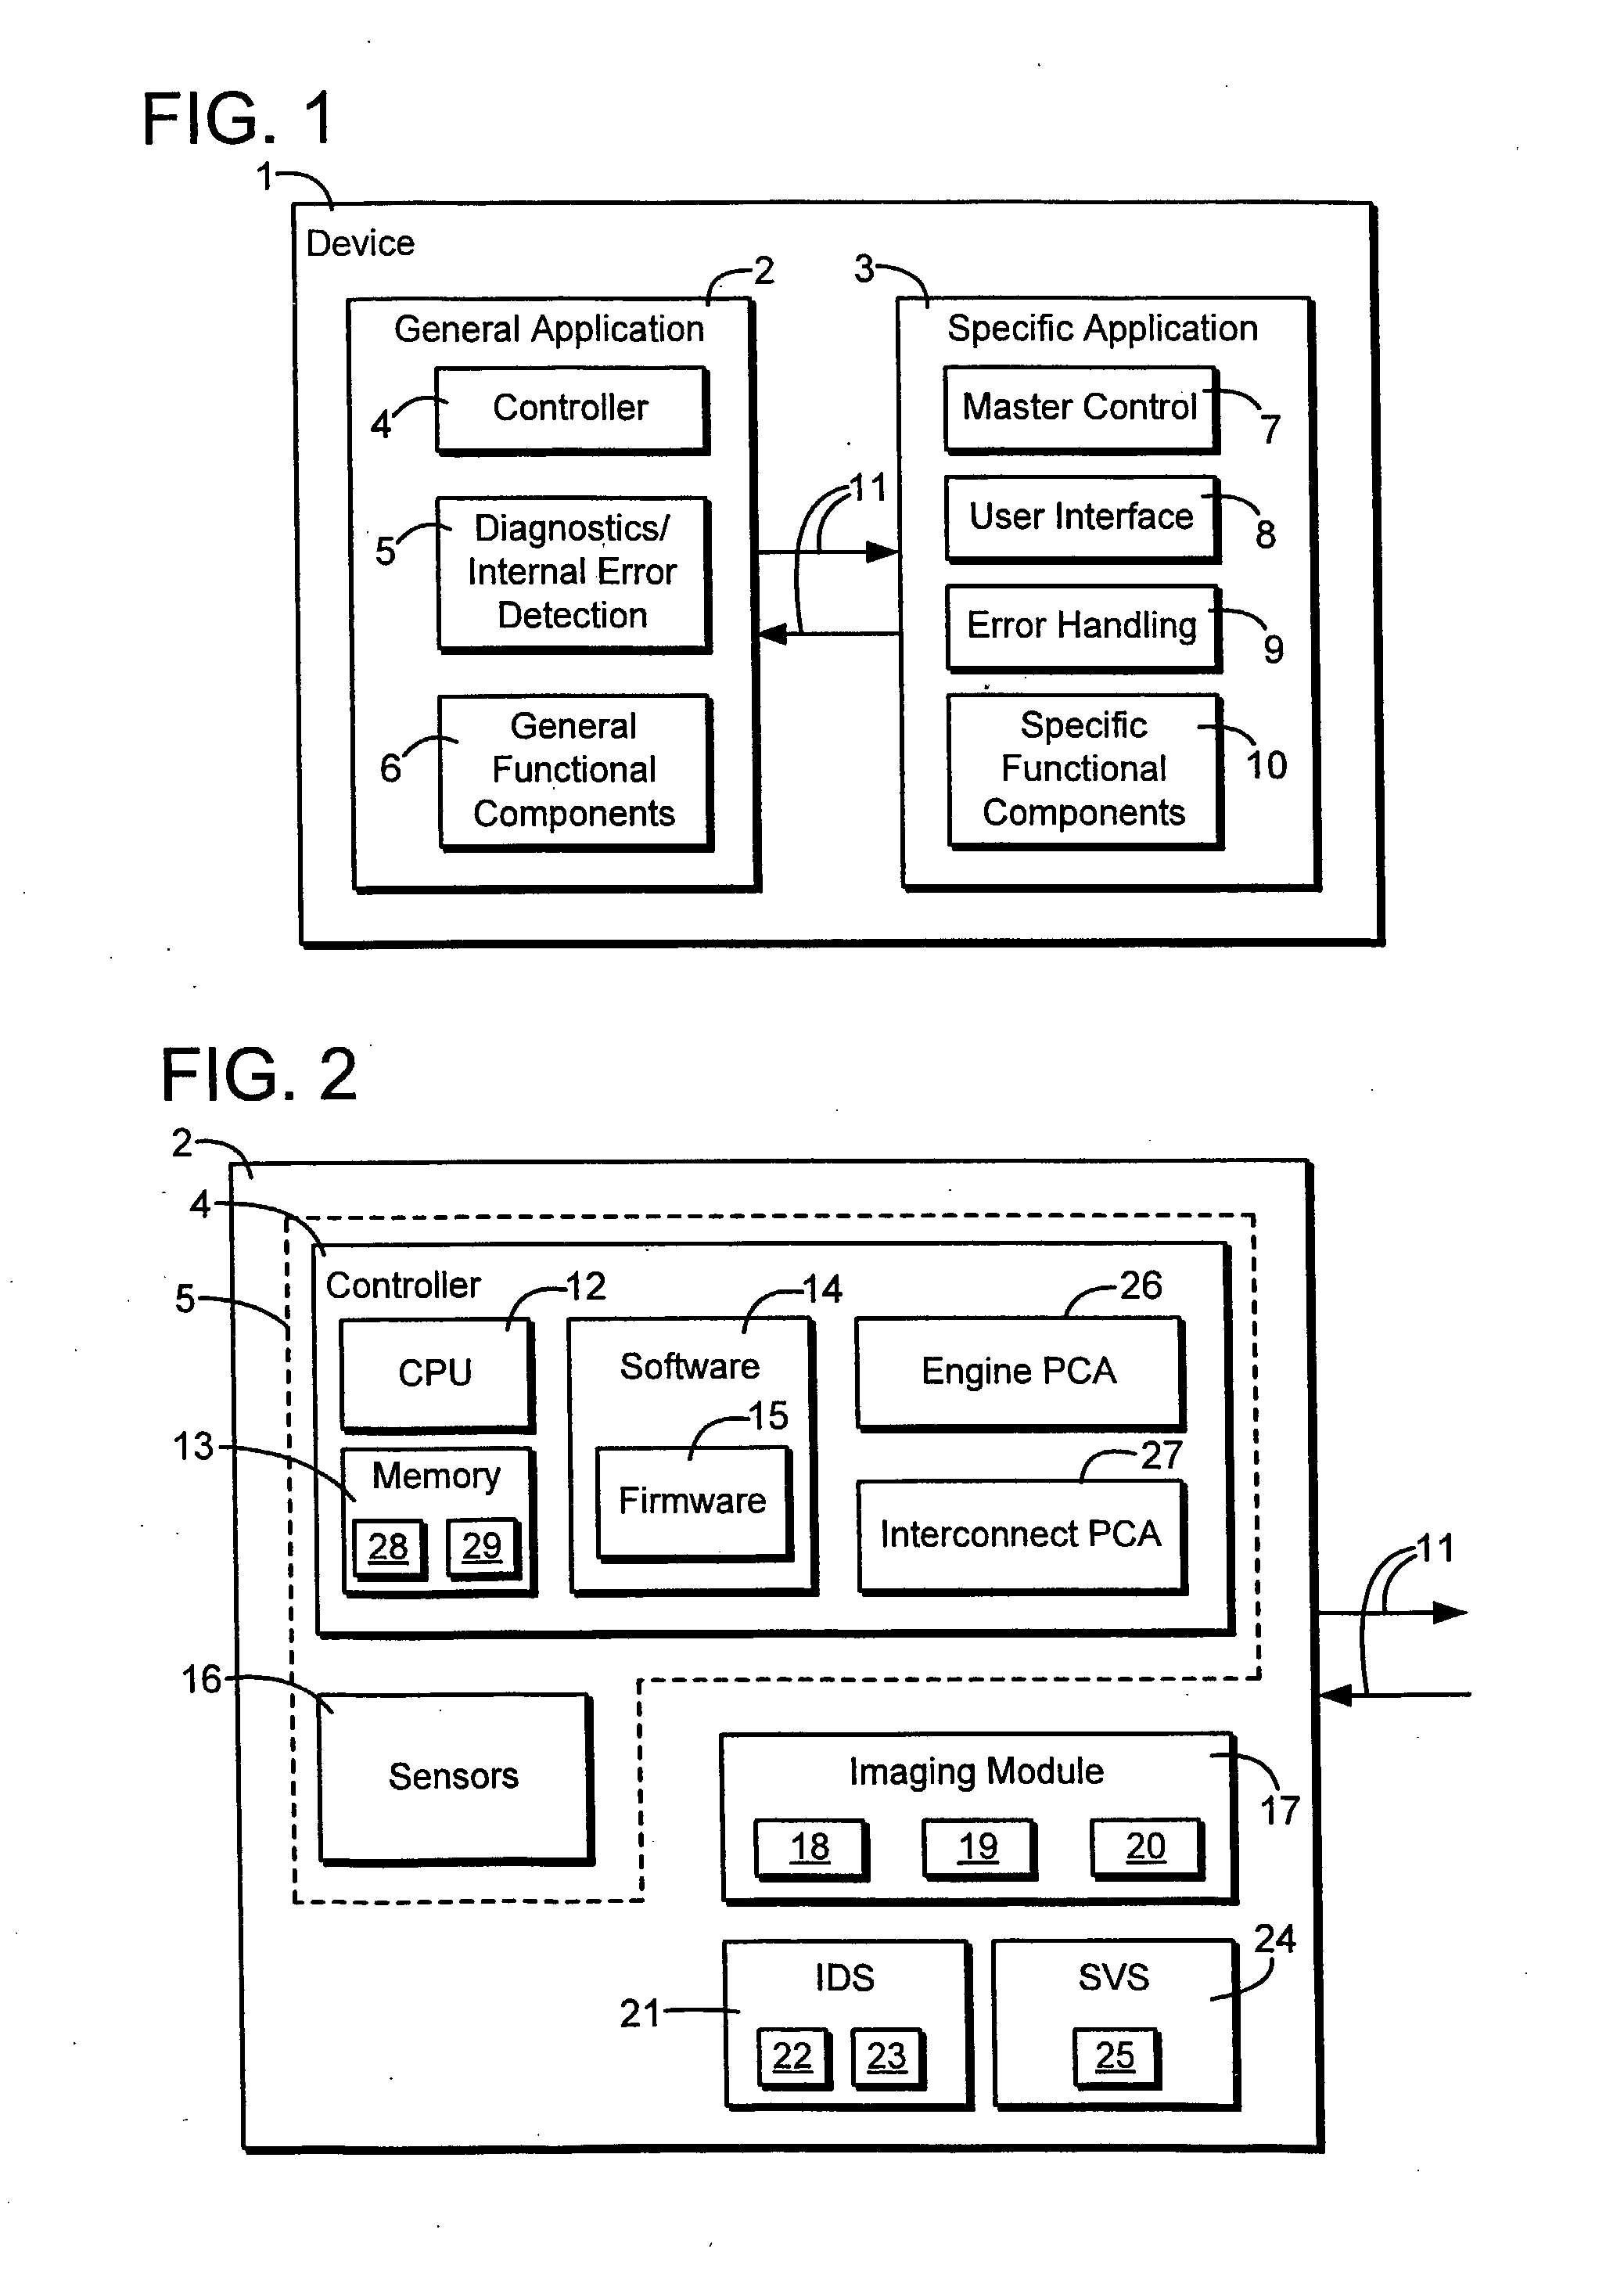 System and Method of Reporting Error Codes in an Electronically Controlled Device